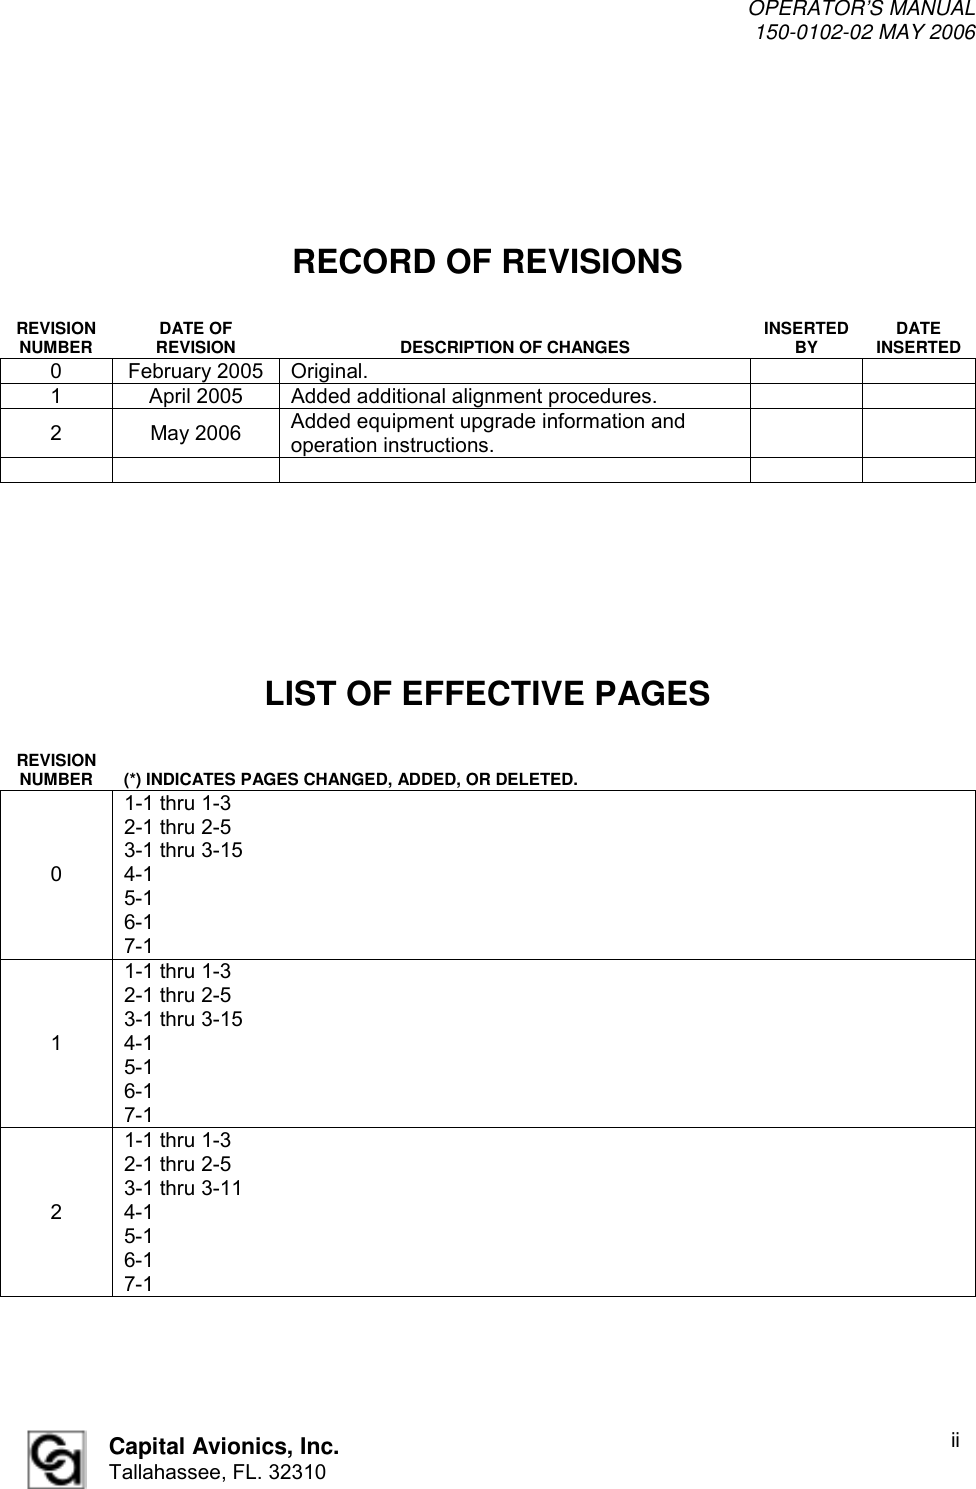 OPERATOR’S MANUAL 150-0102-02 MAY 2006  Capital Avionics, Inc. Tallahassee, FL. 32310   RECORD OF REVISIONS  REVISION NUMBER  DATE OF REVISION DESCRIPTION OF CHANGES INSERTED BY  DATE INSERTED 0 February 2005 Original.     1  April 2005  Added additional alignment procedures.     2 May 2006 Added equipment upgrade information and operation instructions.                LIST OF EFFECTIVE PAGES  REVISION NUMBER   (*) INDICATES PAGES CHANGED, ADDED, OR DELETED. 0 1-1 thru 1-3 2-1 thru 2-5 3-1 thru 3-15 4-1 5-1 6-1 7-1 1 1-1 thru 1-3 2-1 thru 2-5 3-1 thru 3-15 4-1 5-1 6-1 7-1 2 1-1 thru 1-3 2-1 thru 2-5 3-1 thru 3-11 4-1 5-1 6-1 7-1   ii 